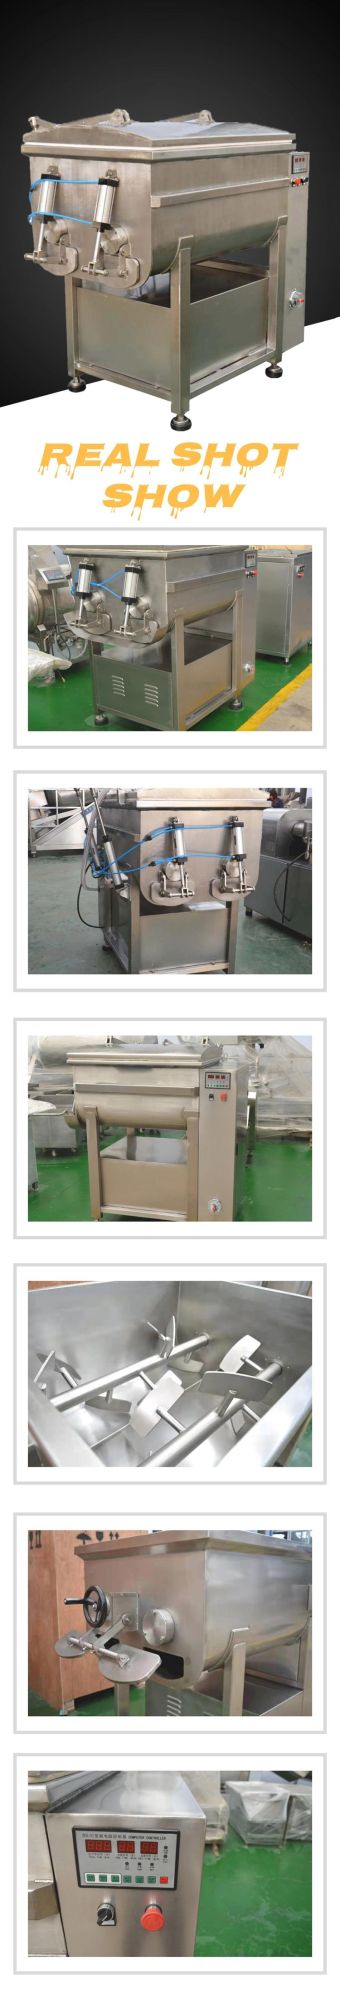 High Quality Stainless Steel Durable Meat Mixer Sausage Meat Mixer